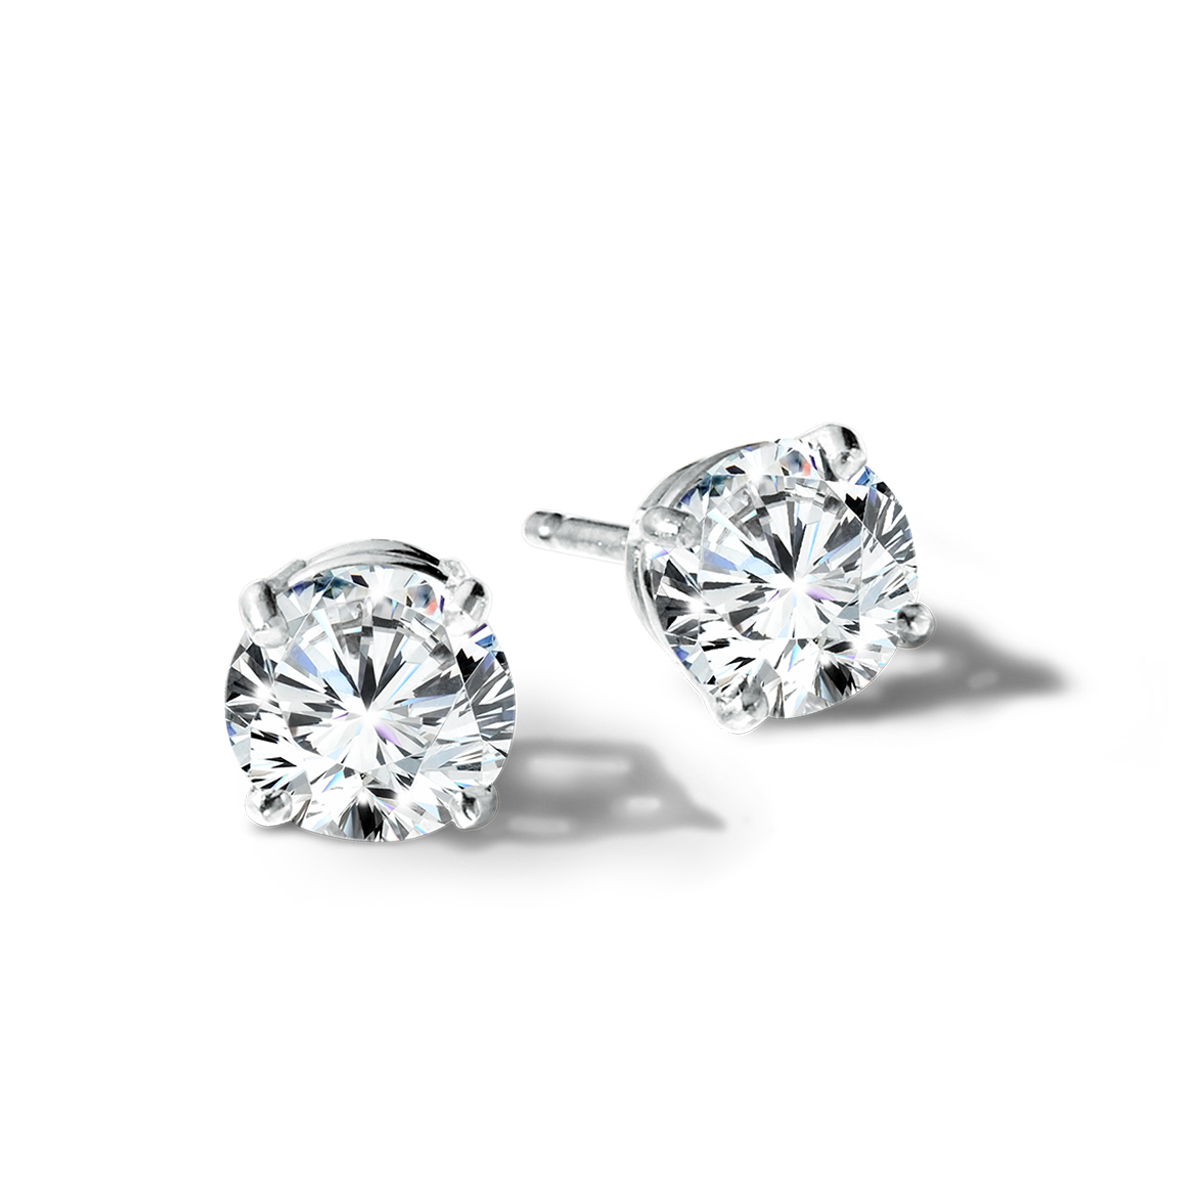 1ctw Lab Grown Round Diamond Solitaire Earrings